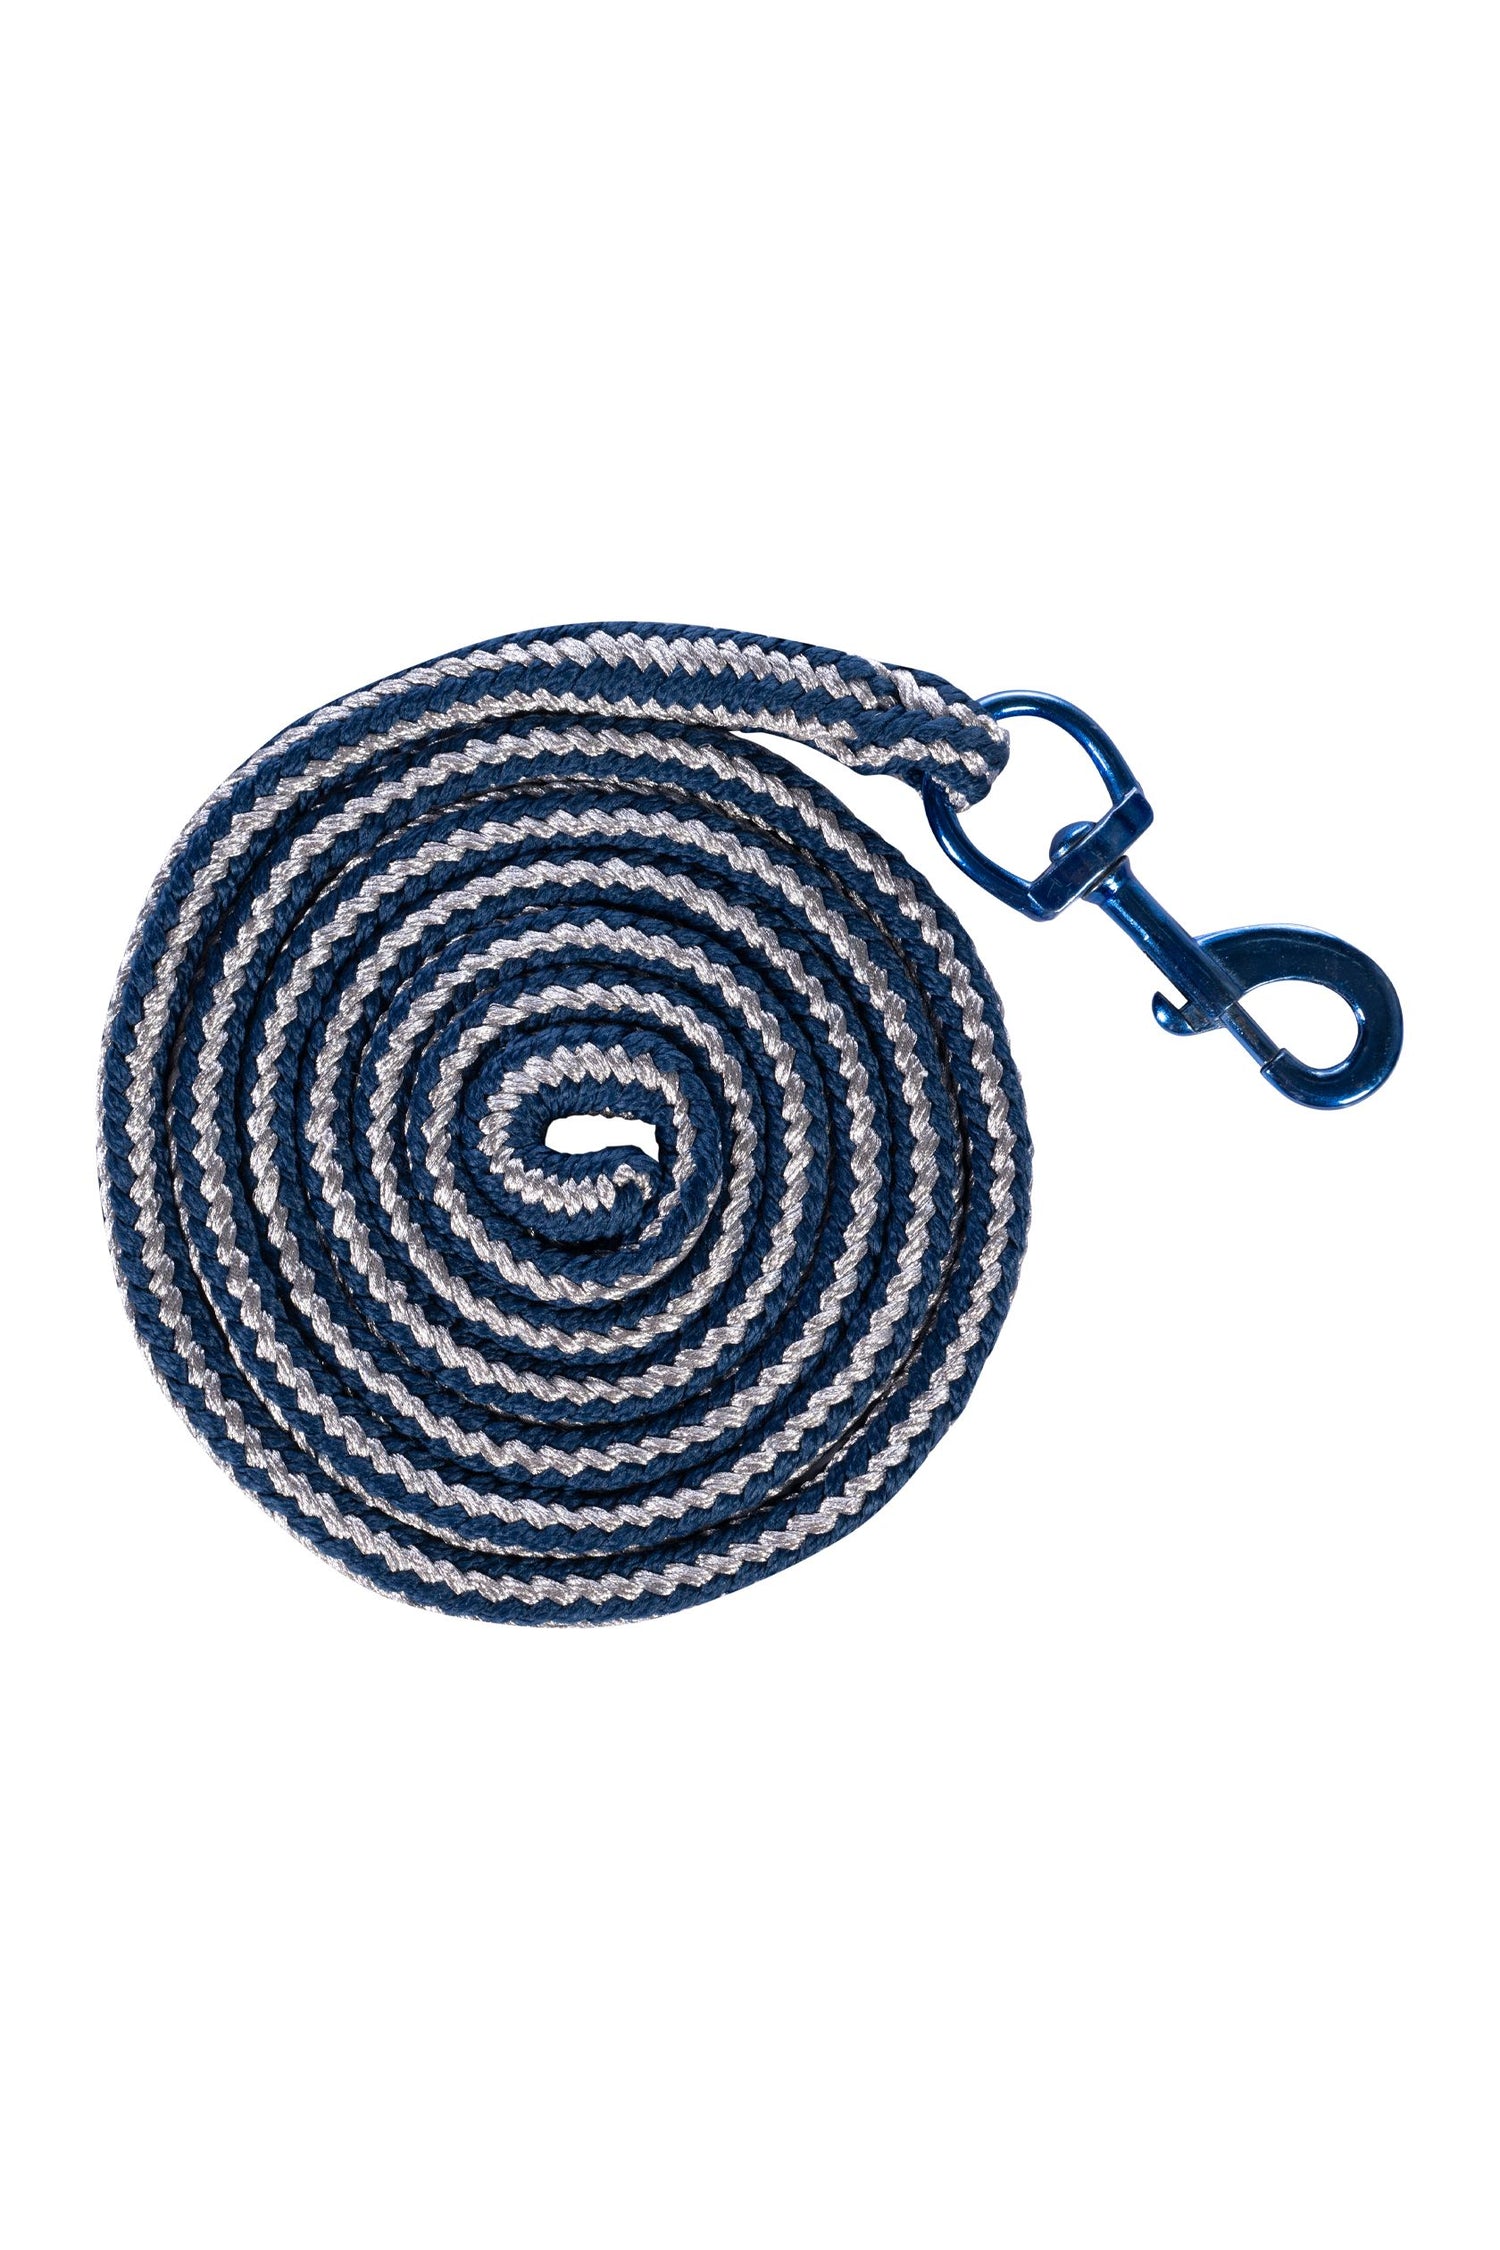 Horse Lead Rope with strong snap hook